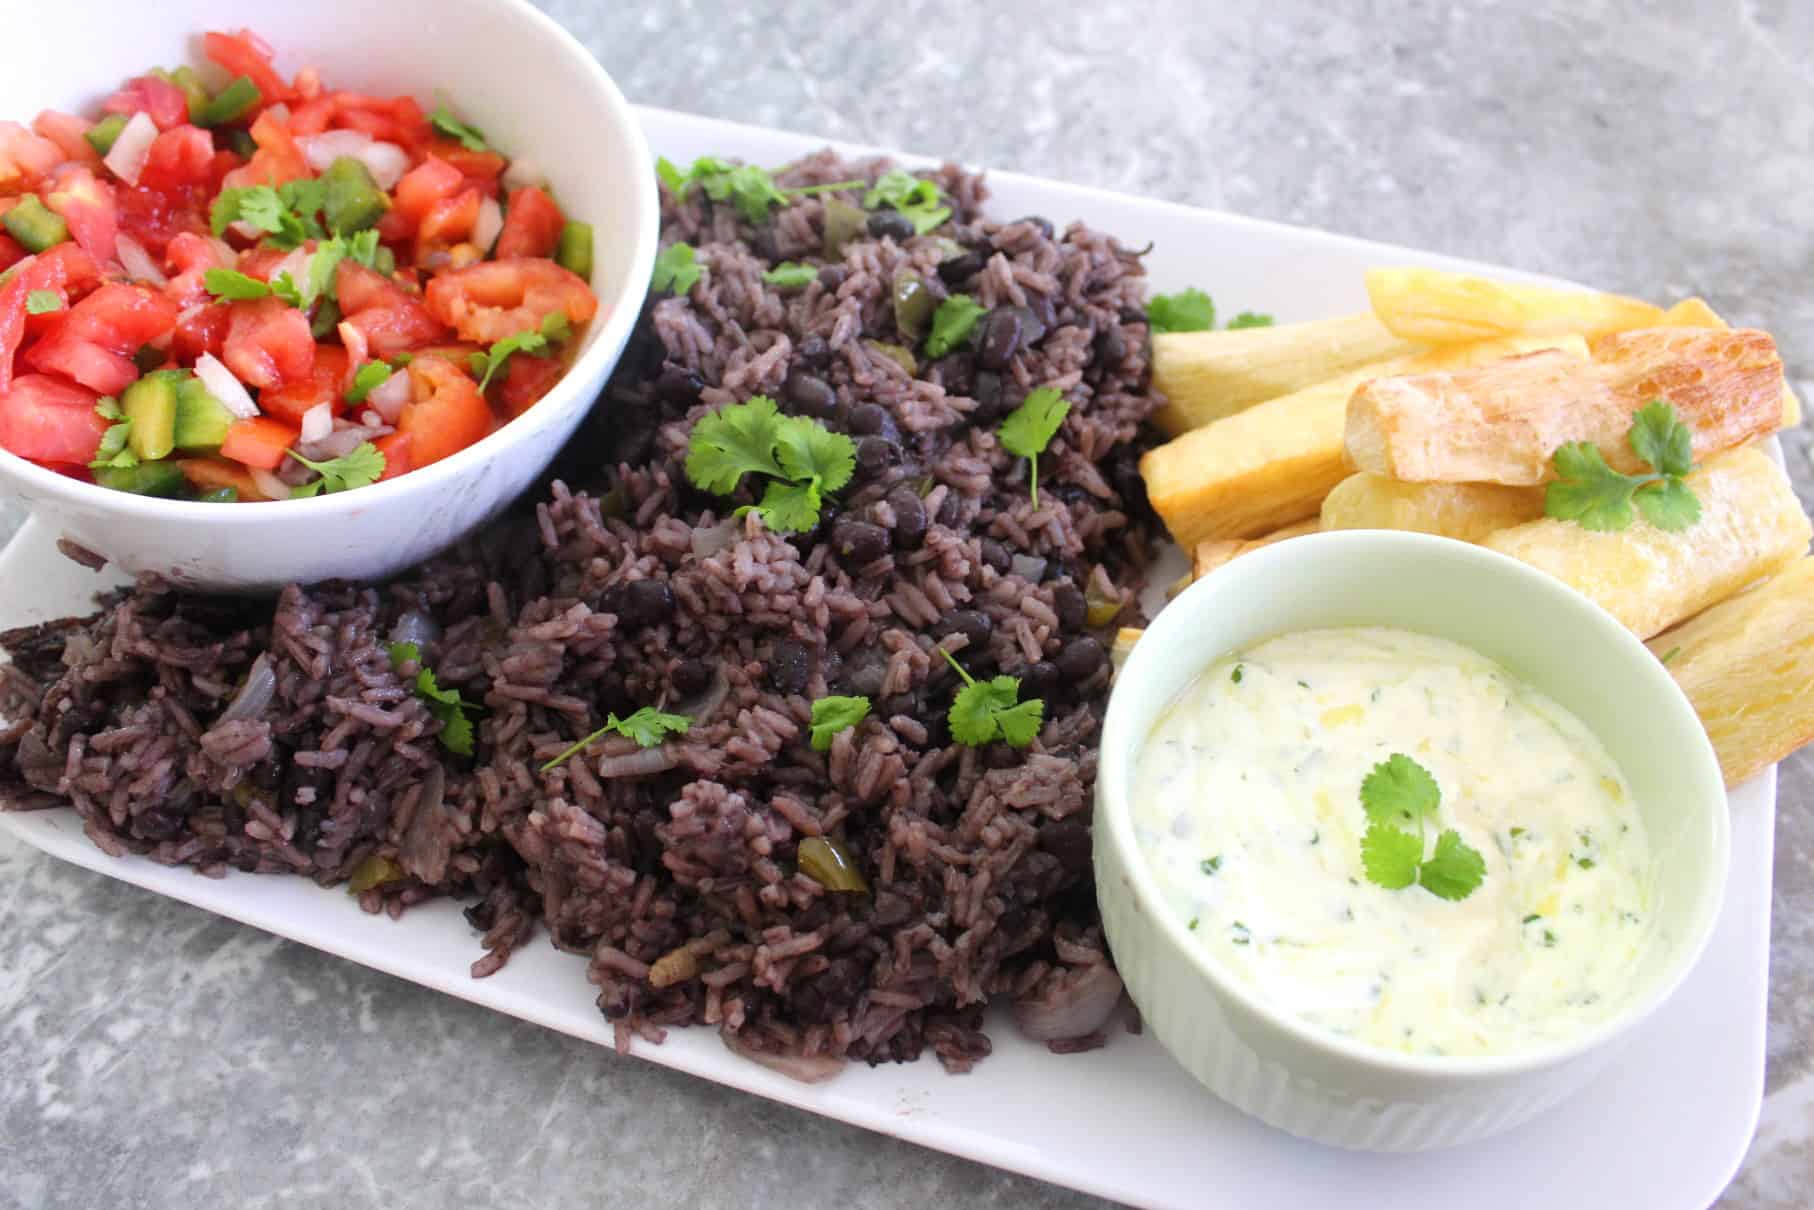 Family style rice and black beans dinner, shown with 2 side dishes.